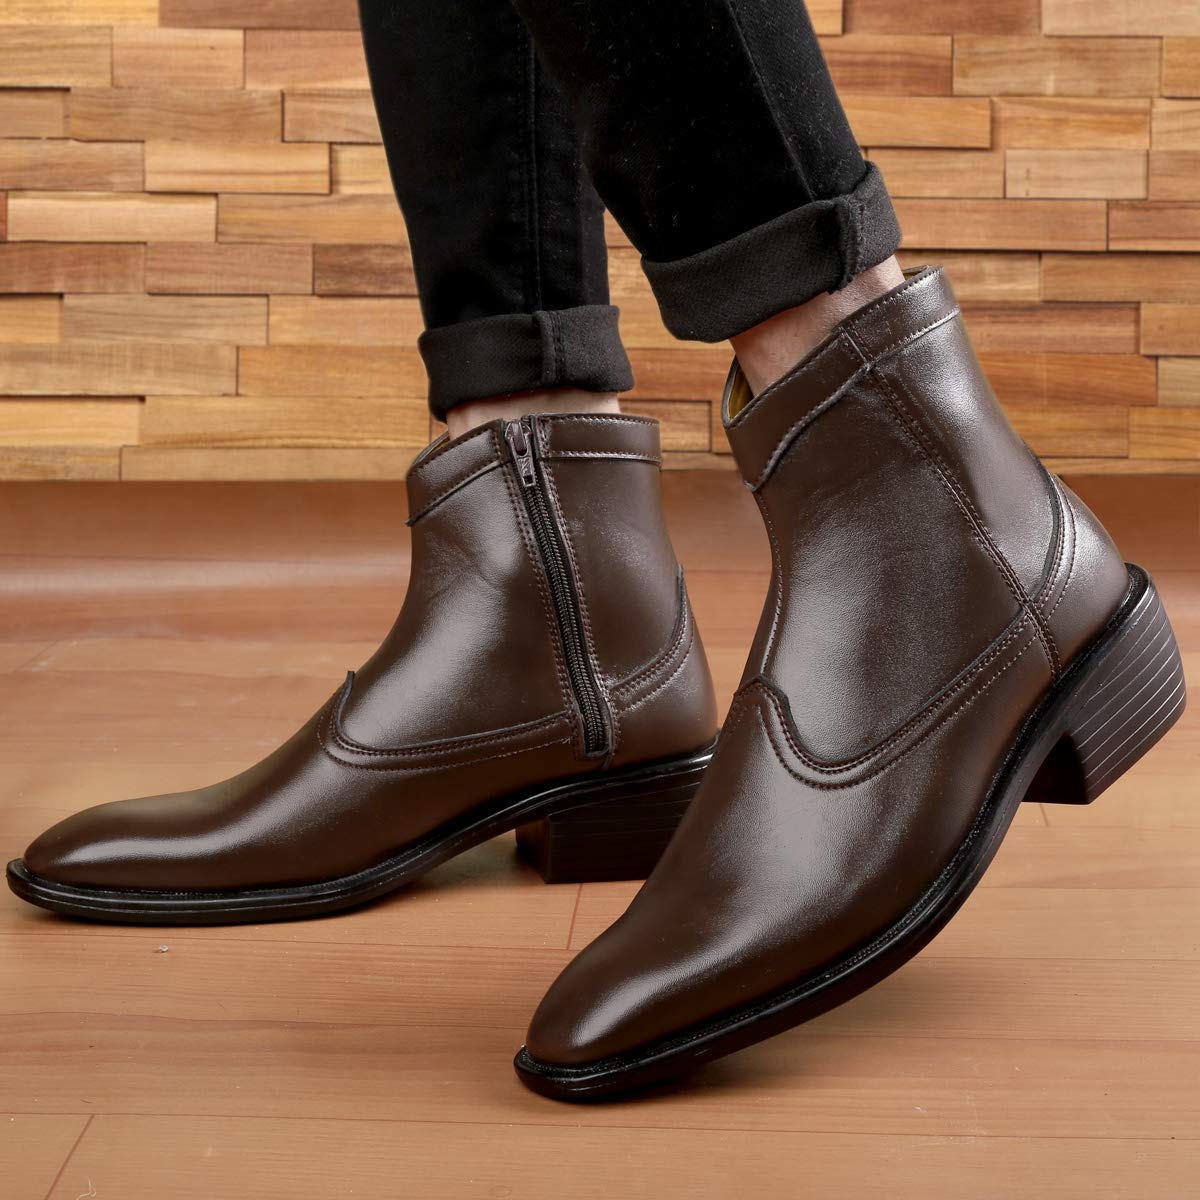 Classy High Ankle Brown Casual And Formal Boot With Zip Pattern-Unique and Classy